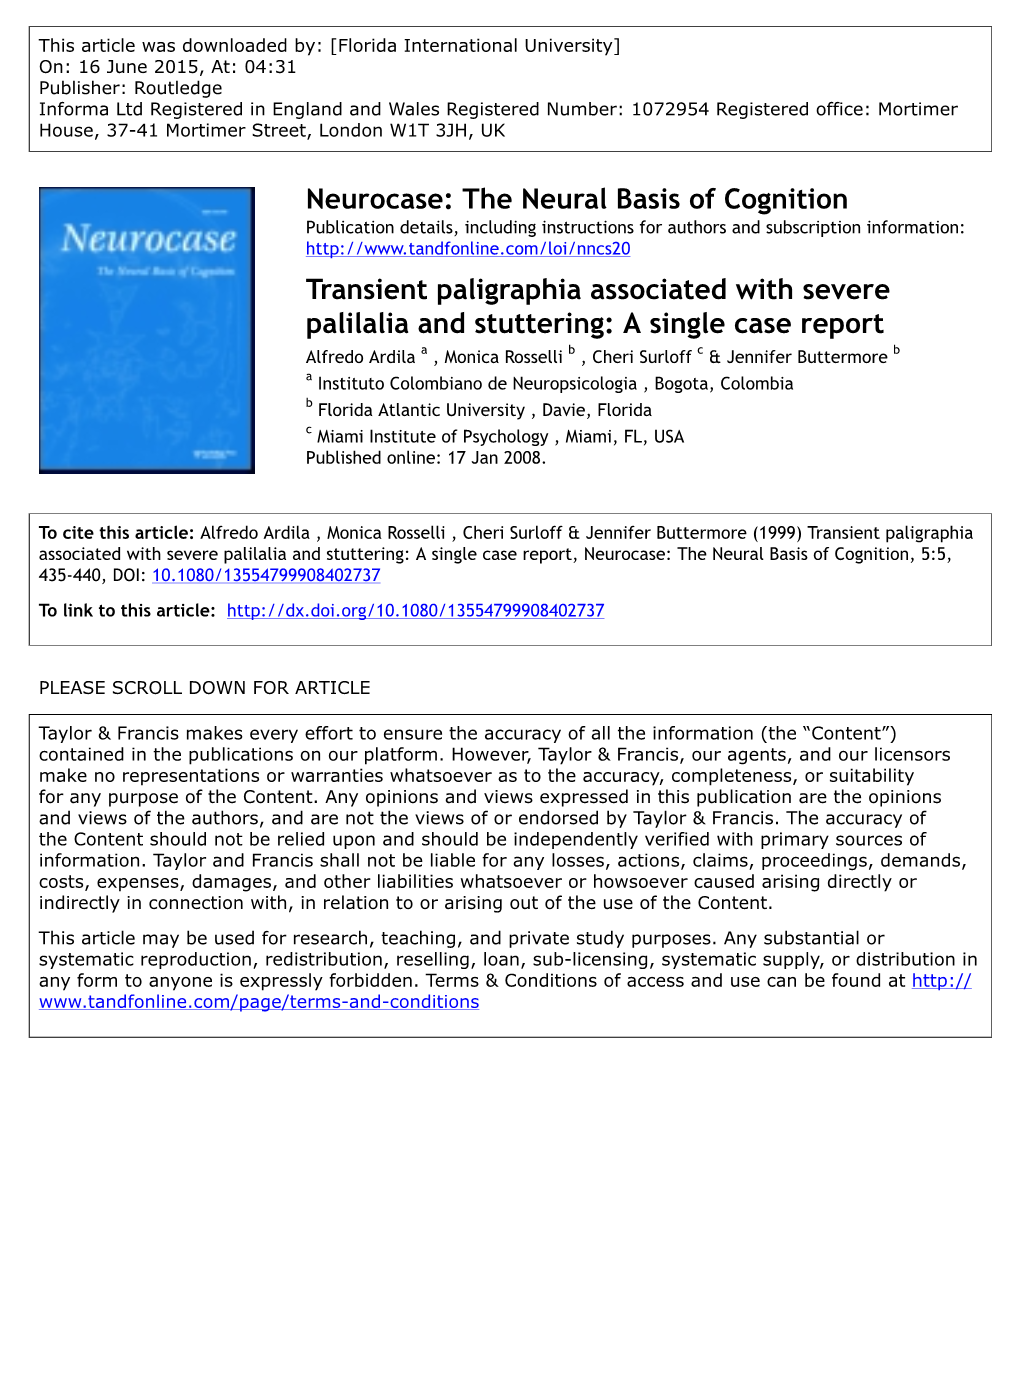 Neurocase: the Neural Basis of Cognition Transient Paligraphia